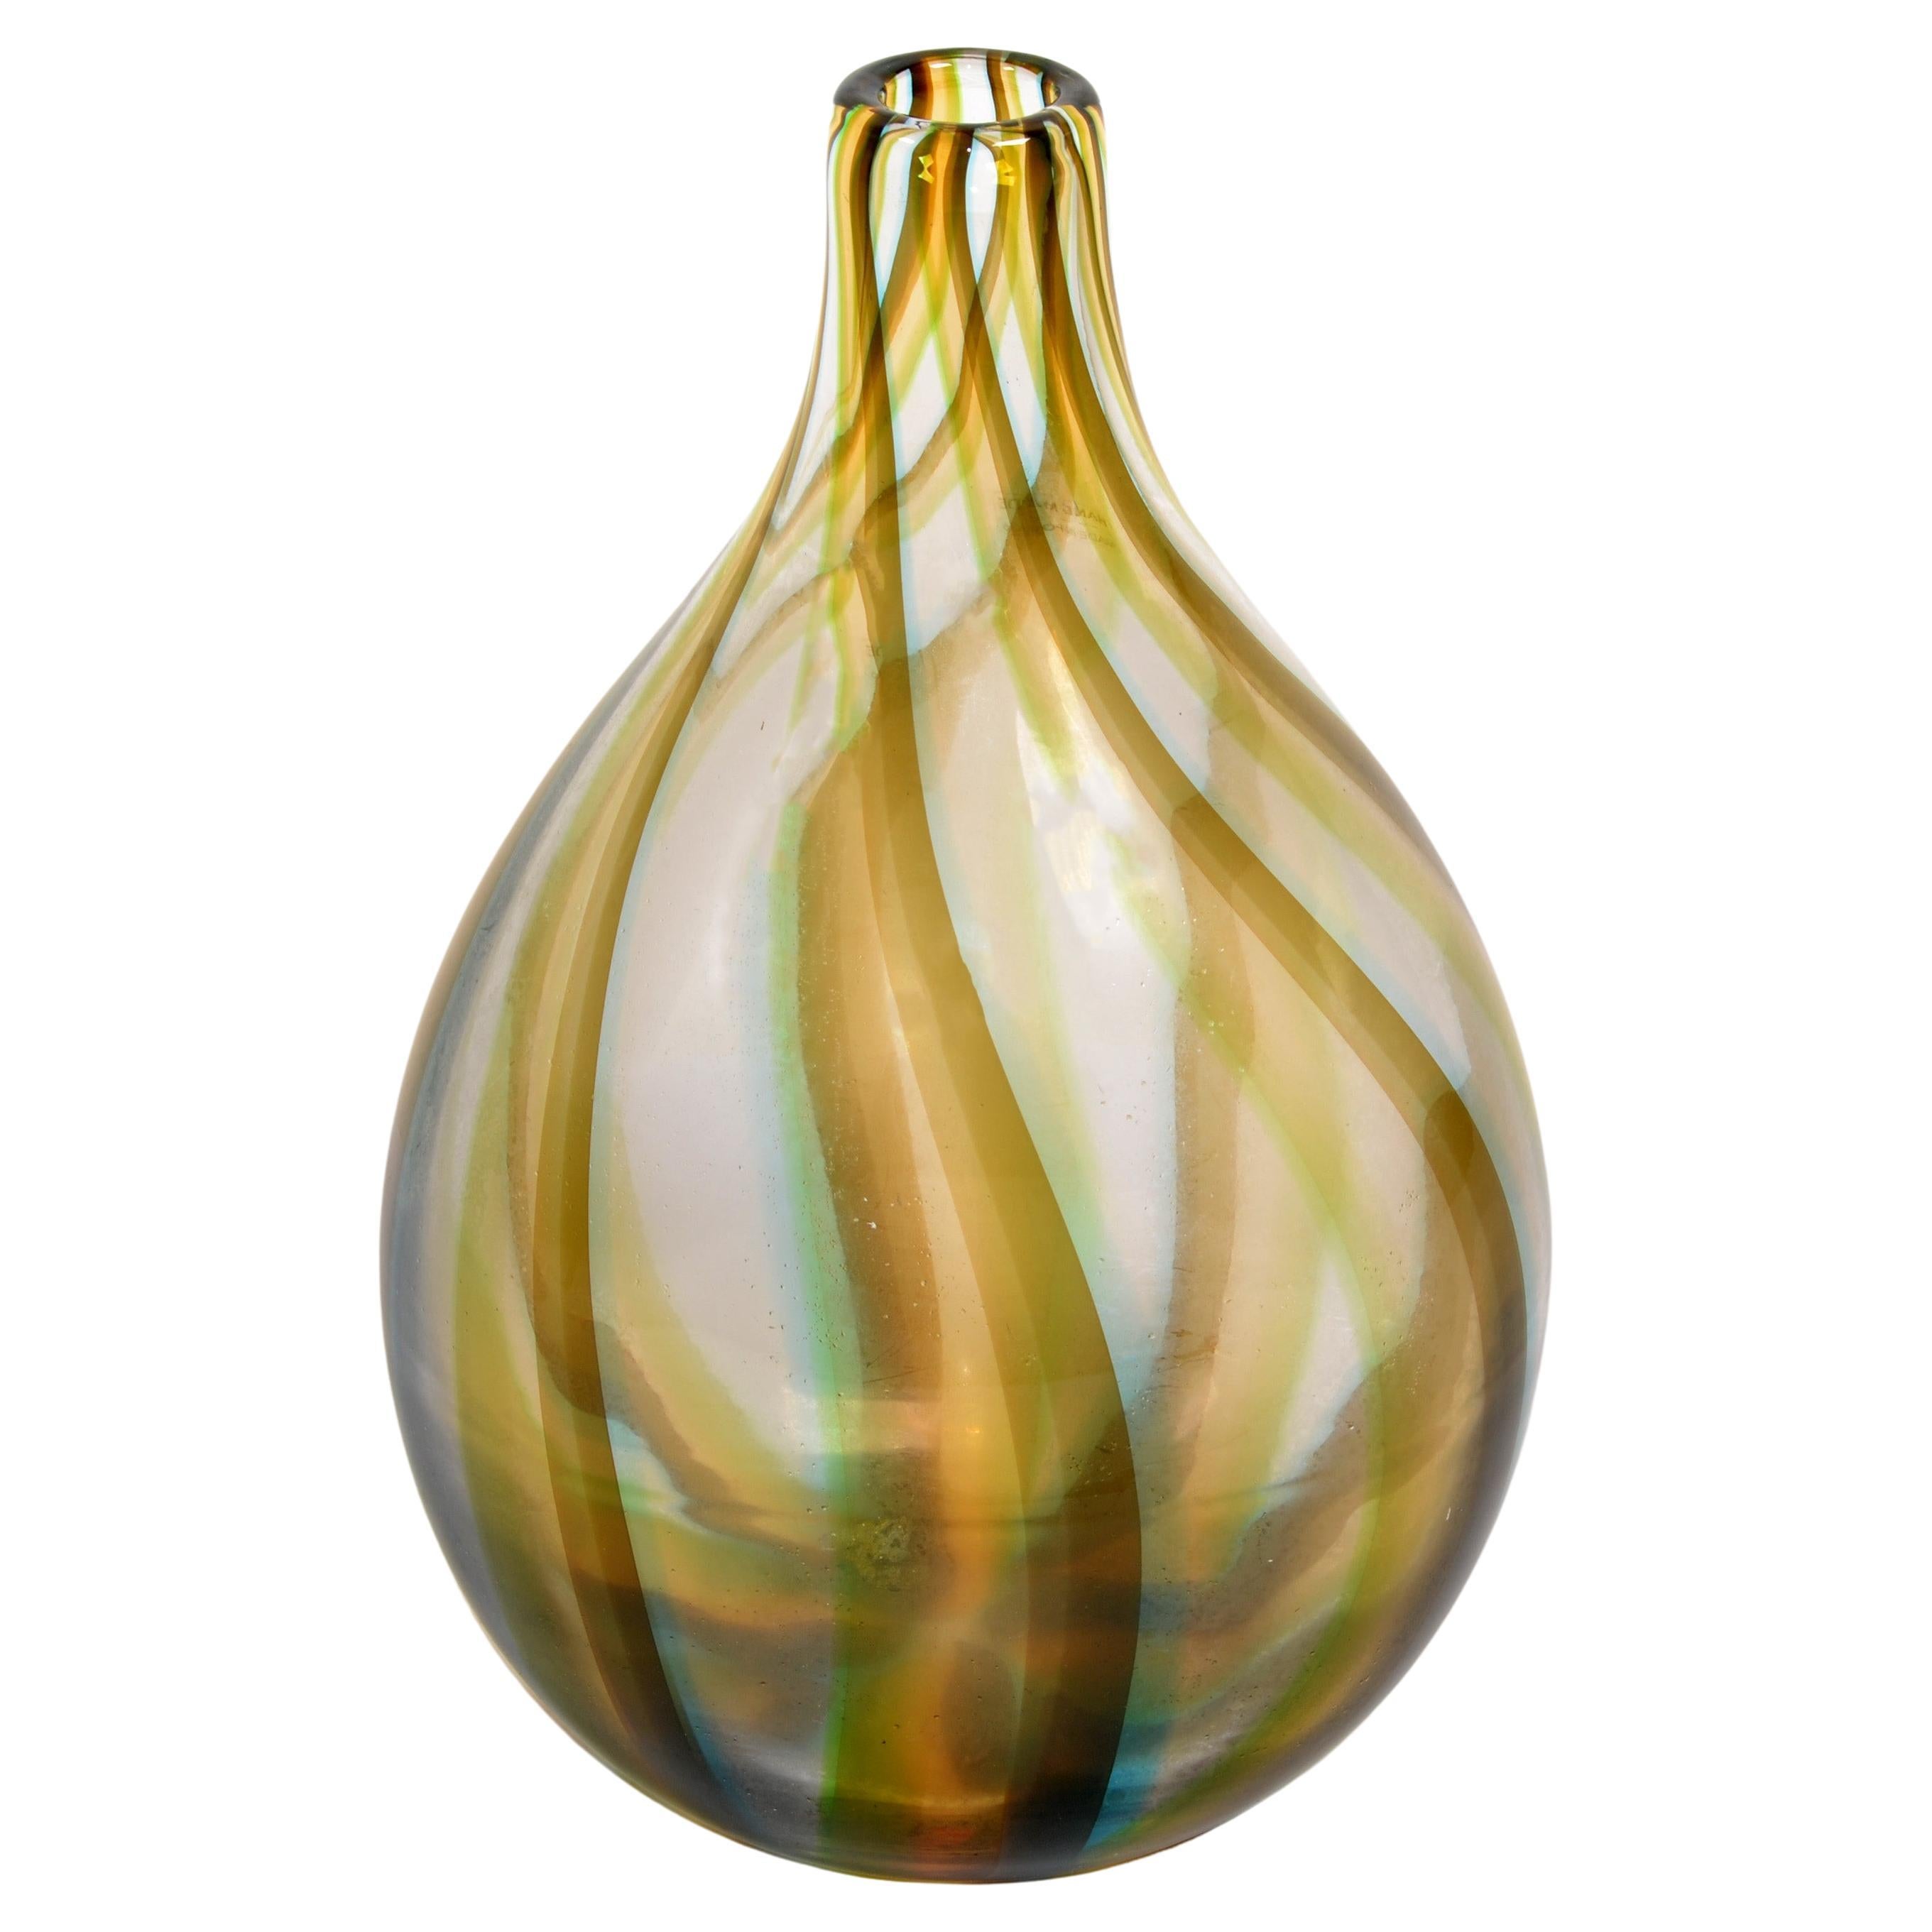 Heavy beautiful art glass Vase in hues of Amber, Blue and Bronze Color Swirl Design.
Mid-Century Modern Period styled after Venini Glass Studio.
Marked with label, made in Poland.
In good condition, no chips or cracks.
Opening measures 1.25 inches.